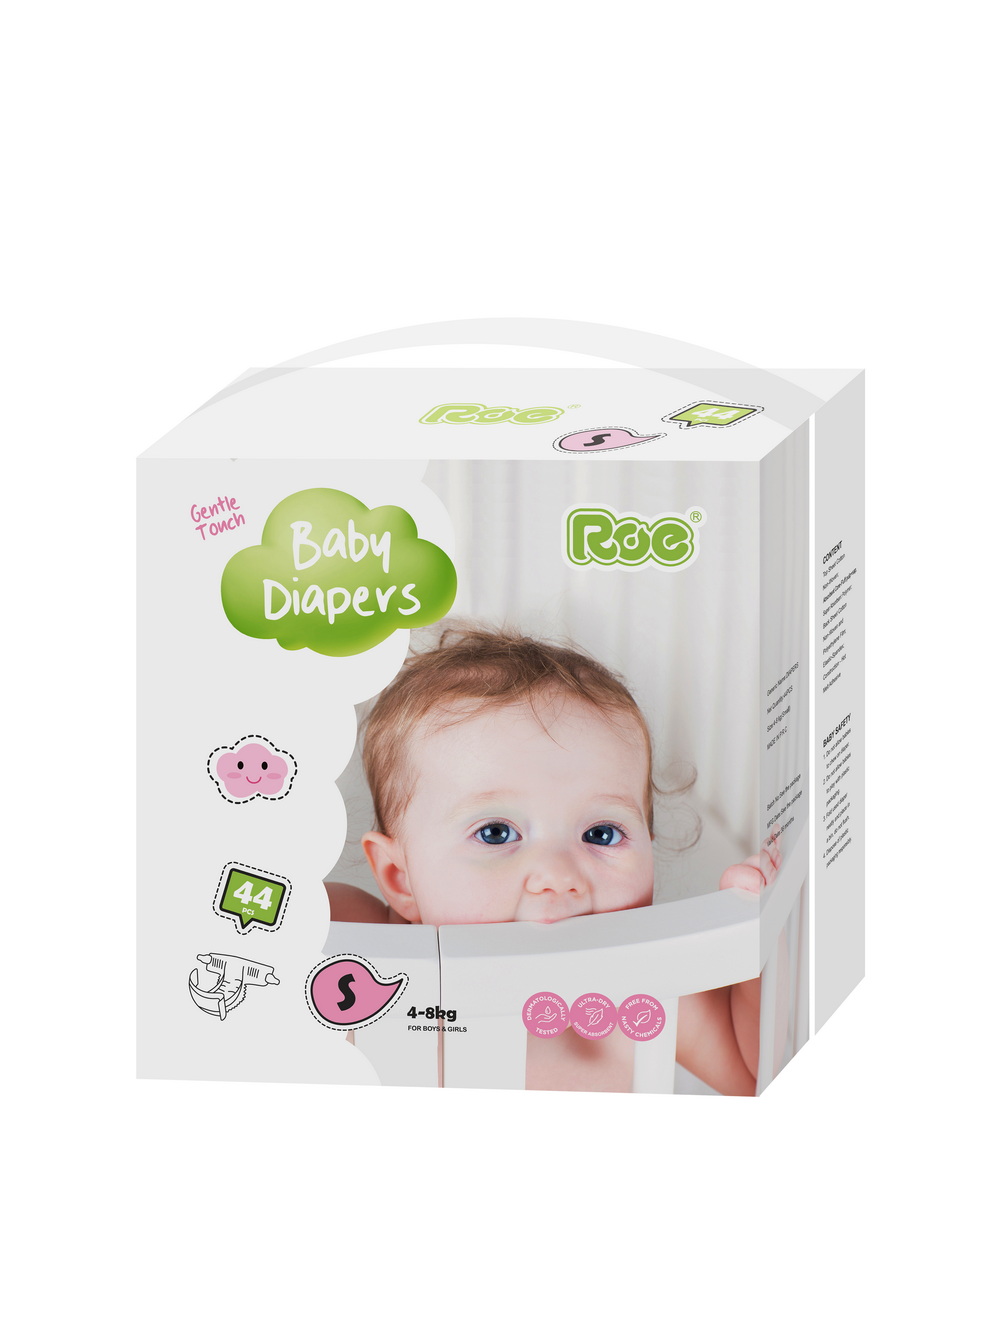 2021 New Arrival-Roe Baby diapers